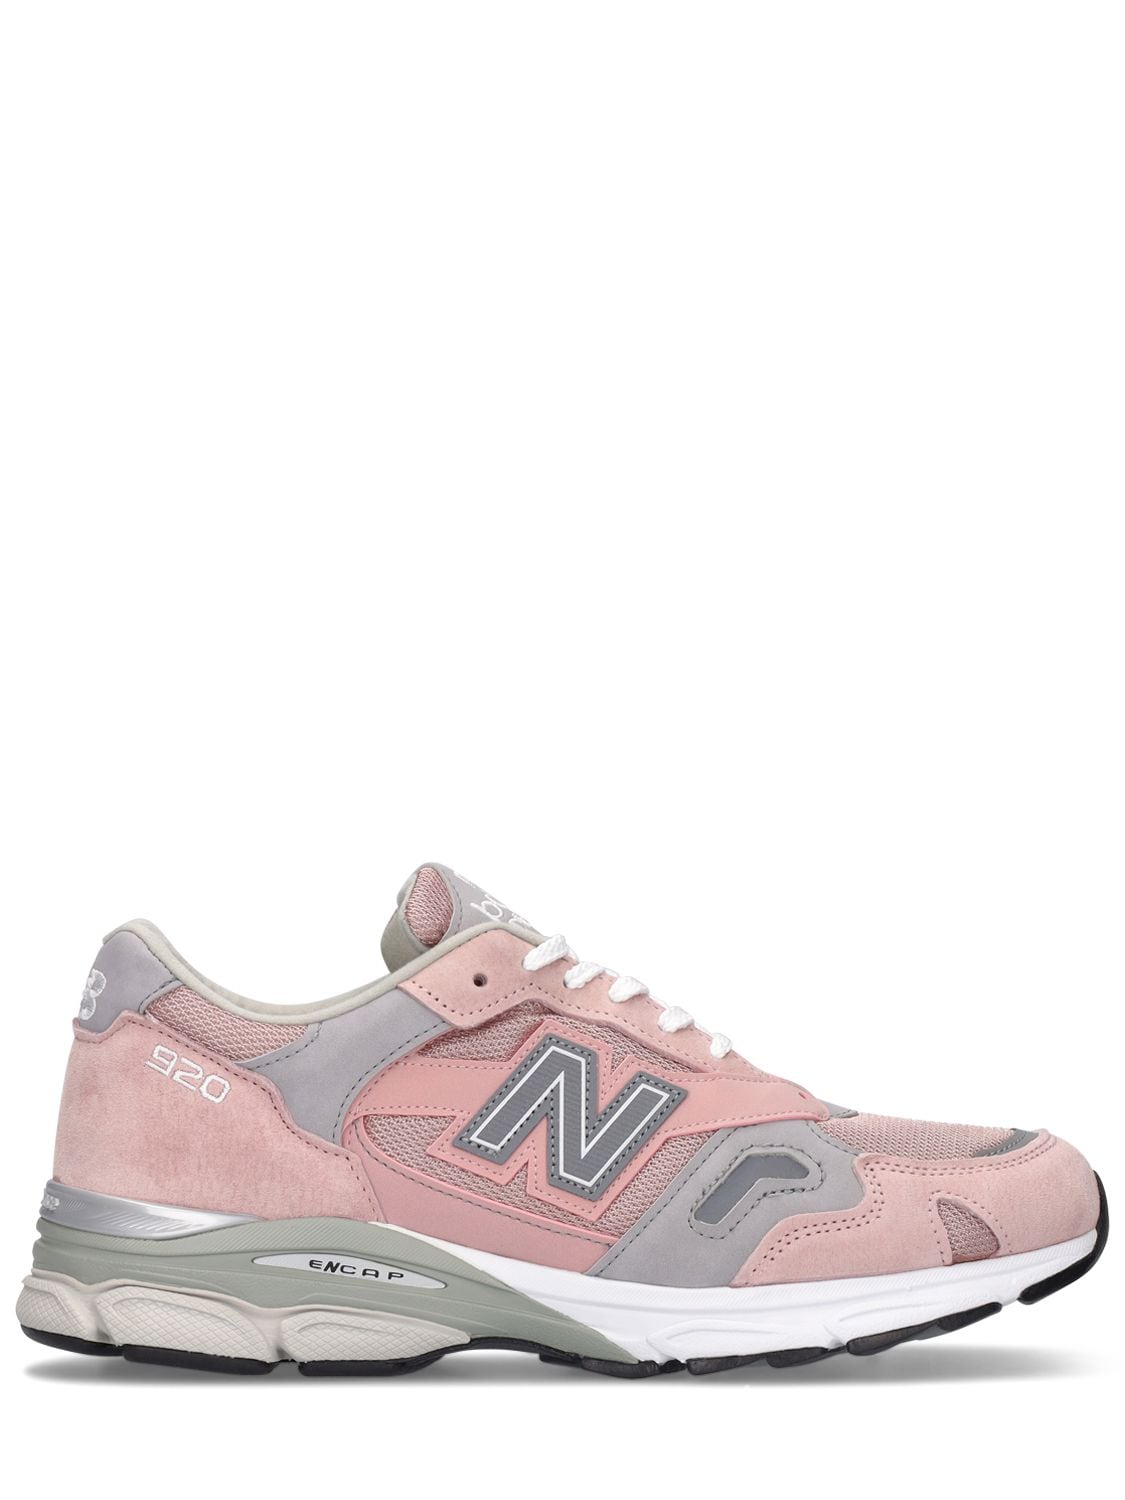 NEW BALANCE 920 SNEAKERS